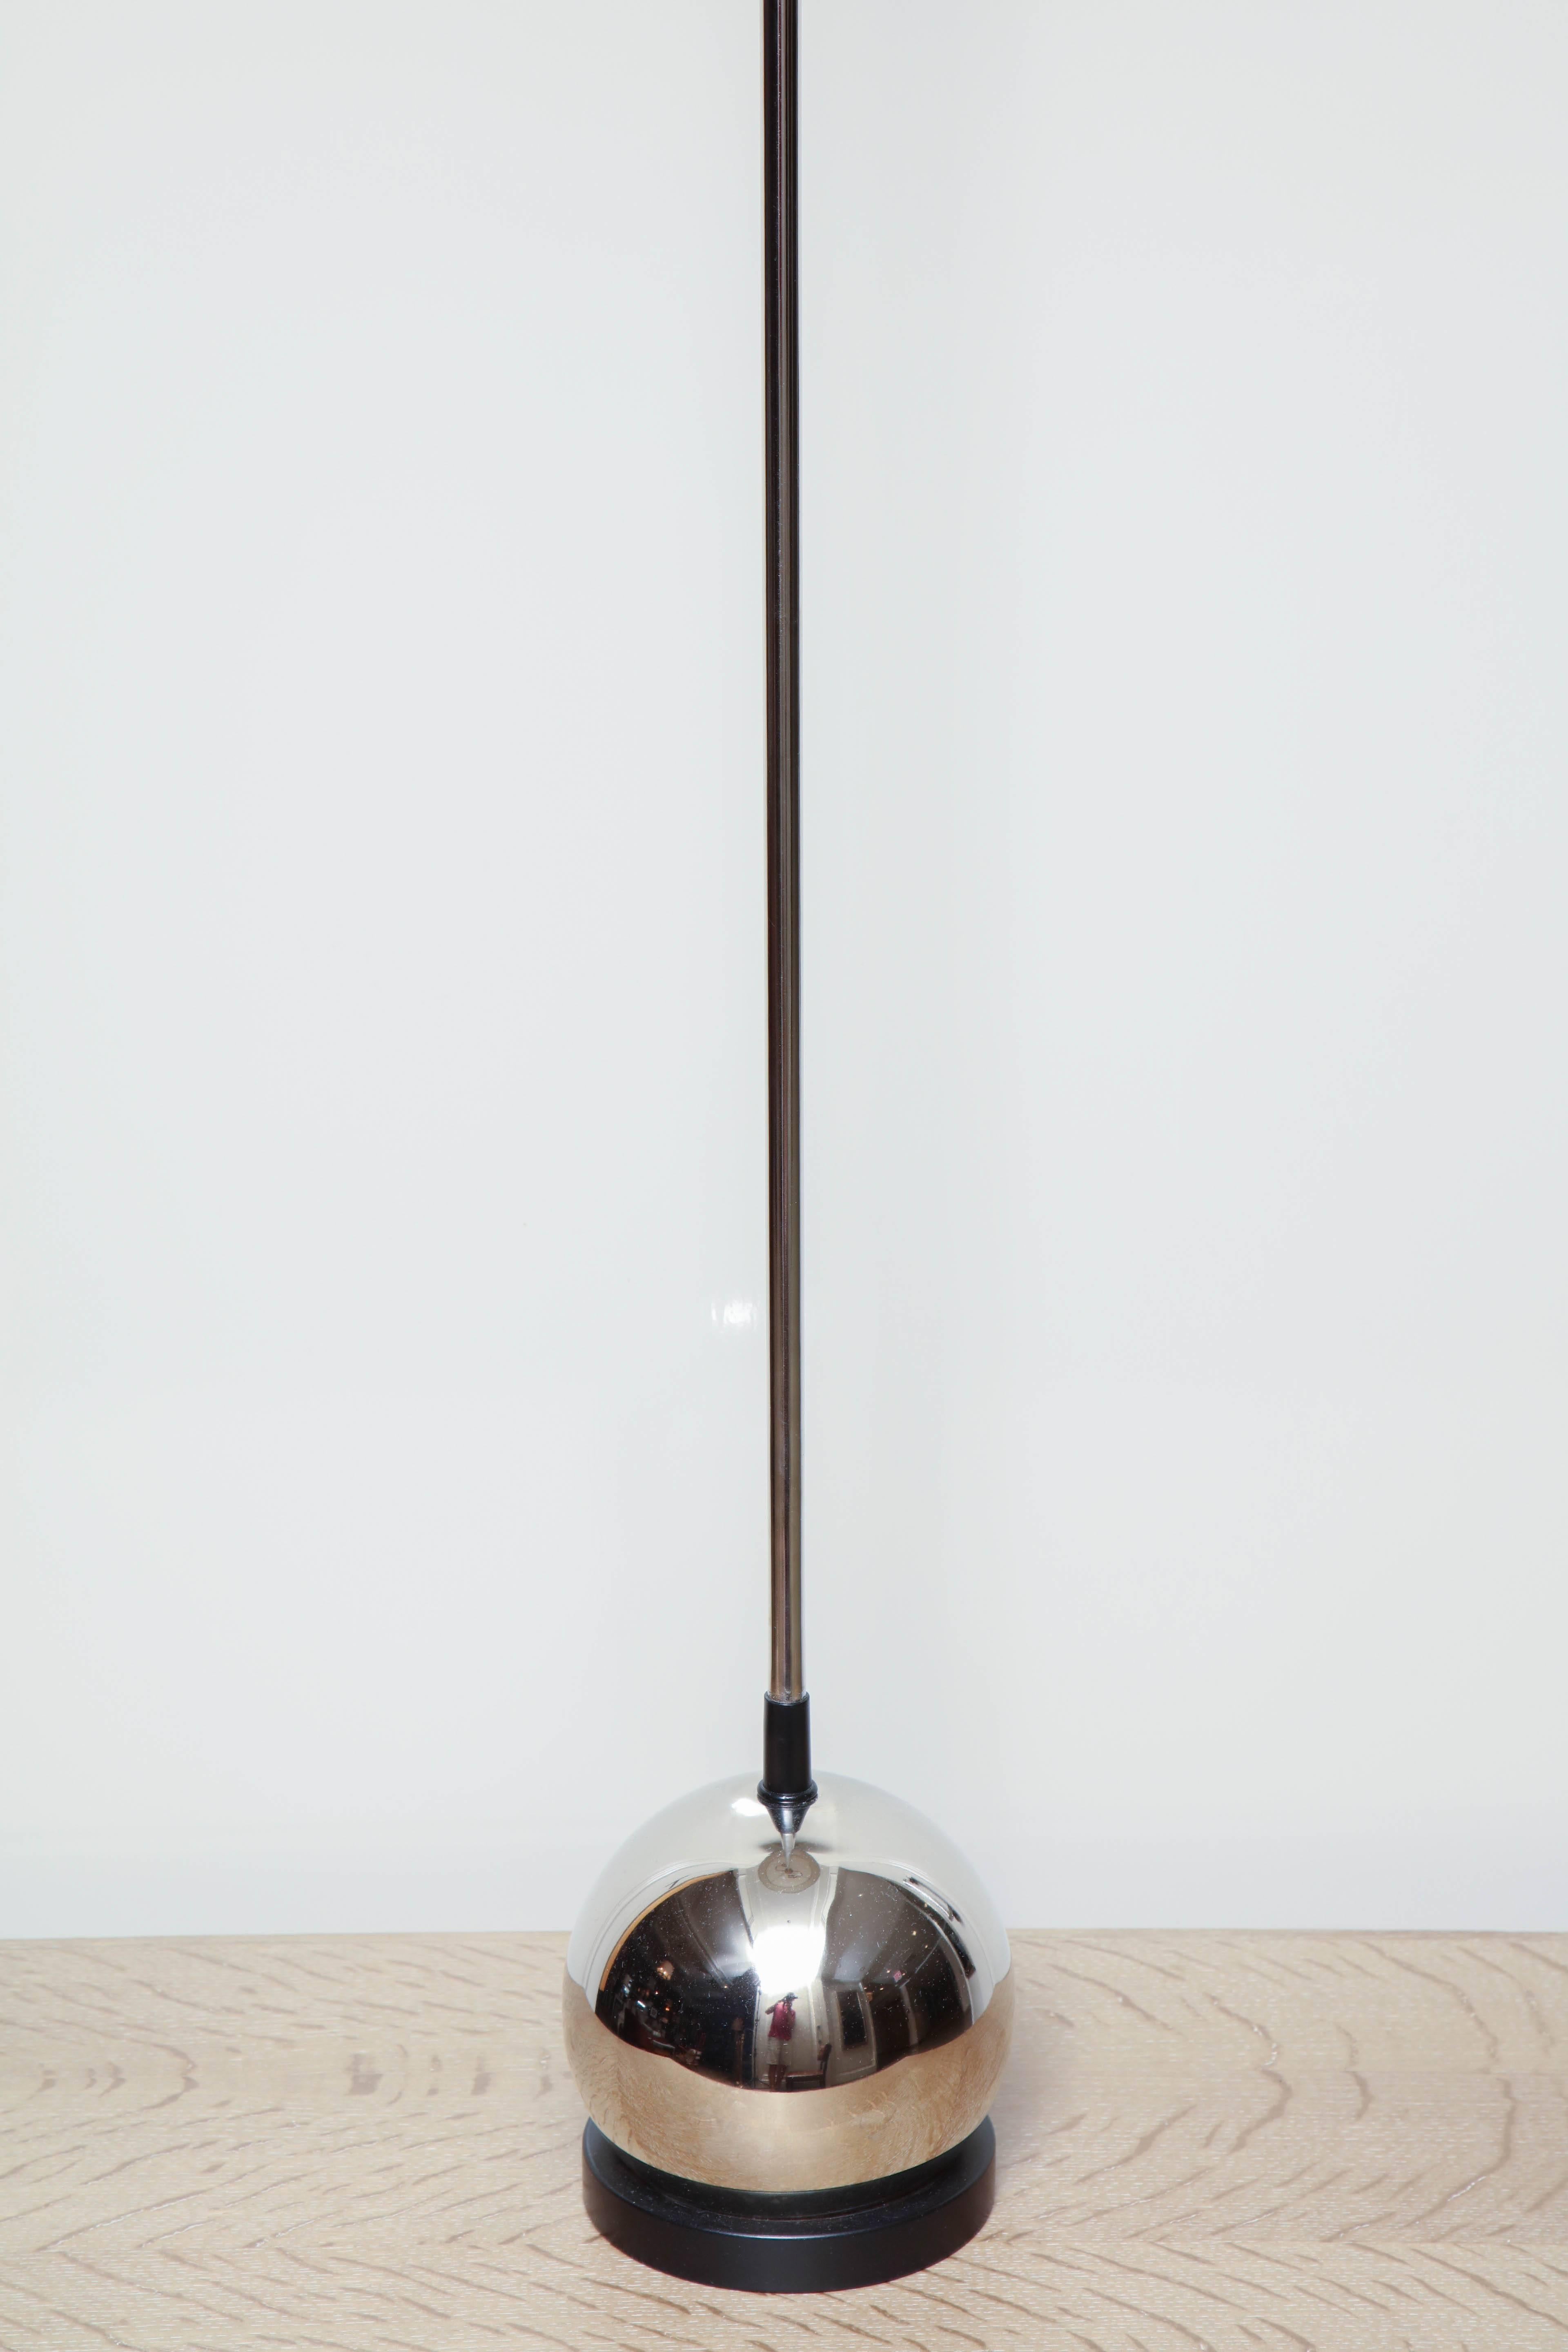 Chrome floor lamp with spherical base in the manner of Chase, circa 1940 celadon semi-enclosed silk drum shade.